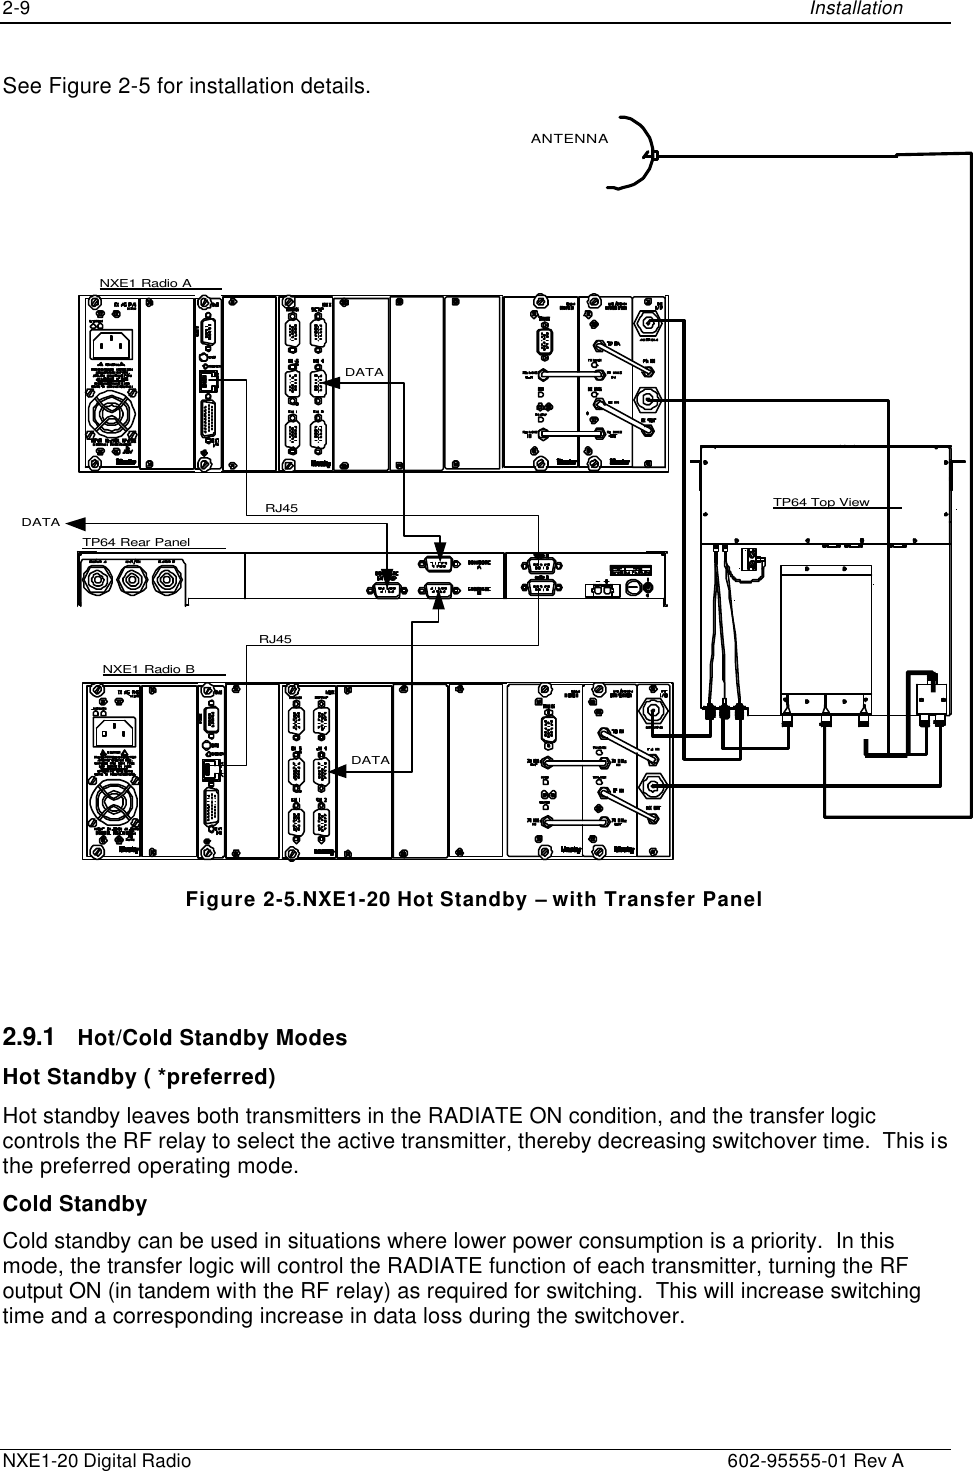 2-9    Installation  NXE1-20 Digital Radio    602-95555-01 Rev A See Figure 2-5 for installation details. ANTENNARJ45RJ45DATADATADATATP64 Top ViewTP64 Rear PanelNXE1 Radio BNXE1 Radio A Figure 2-5.NXE1-20 Hot Standby – with Transfer Panel    2.9.1 Hot/Cold Standby Modes Hot Standby ( *preferred) Hot standby leaves both transmitters in the RADIATE ON condition, and the transfer logic controls the RF relay to select the active transmitter, thereby decreasing switchover time.  This is the preferred operating mode. Cold Standby Cold standby can be used in situations where lower power consumption is a priority.  In this mode, the transfer logic will control the RADIATE function of each transmitter, turning the RF output ON (in tandem with the RF relay) as required for switching.  This will increase switching time and a corresponding increase in data loss during the switchover. 